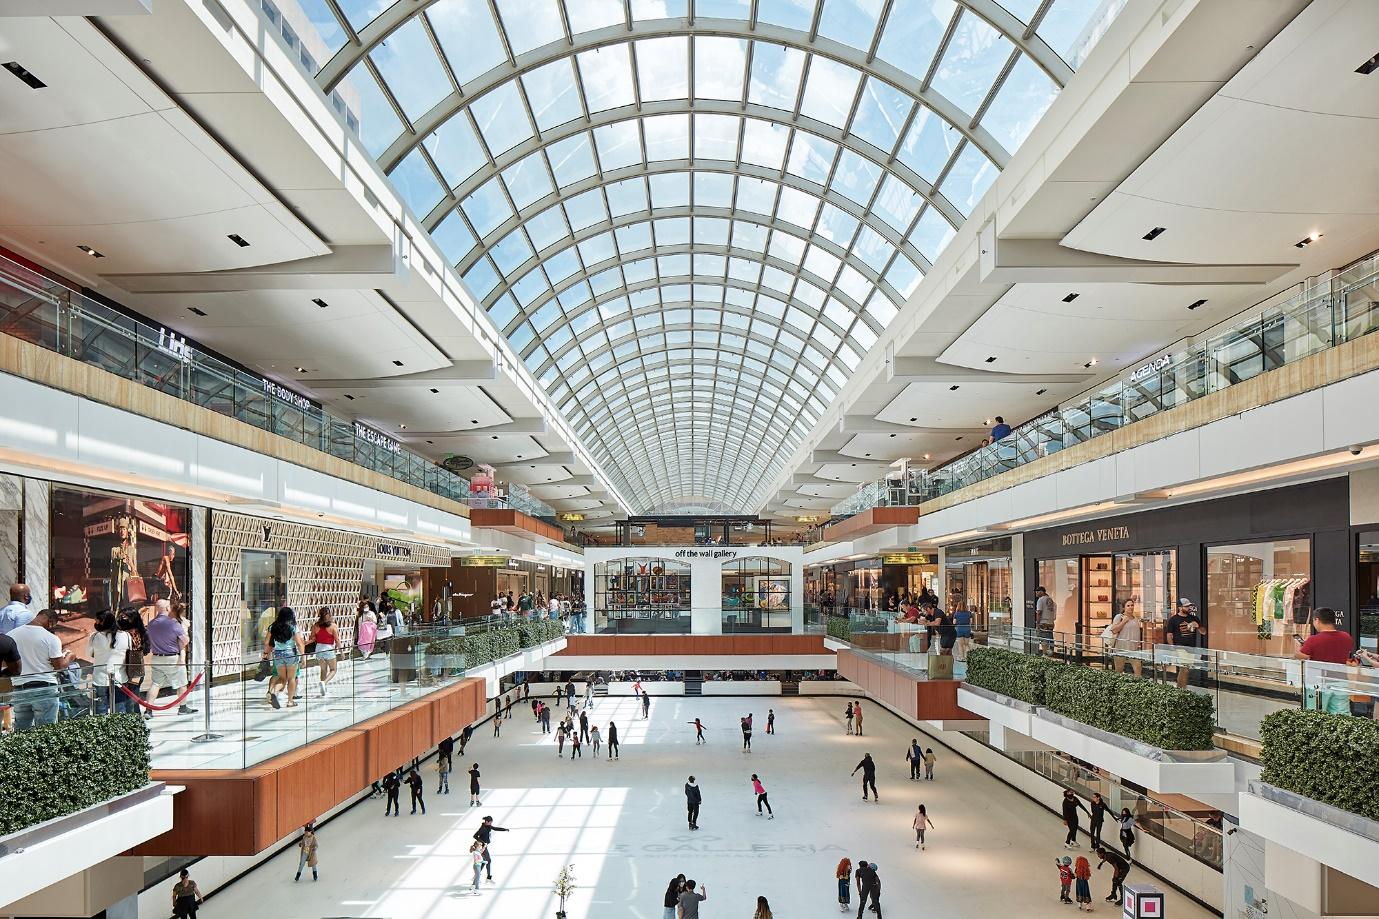 Houston Galleria Continues Its Hot Streak With Unique New Stores,  Restaurants and High-Tech Perks